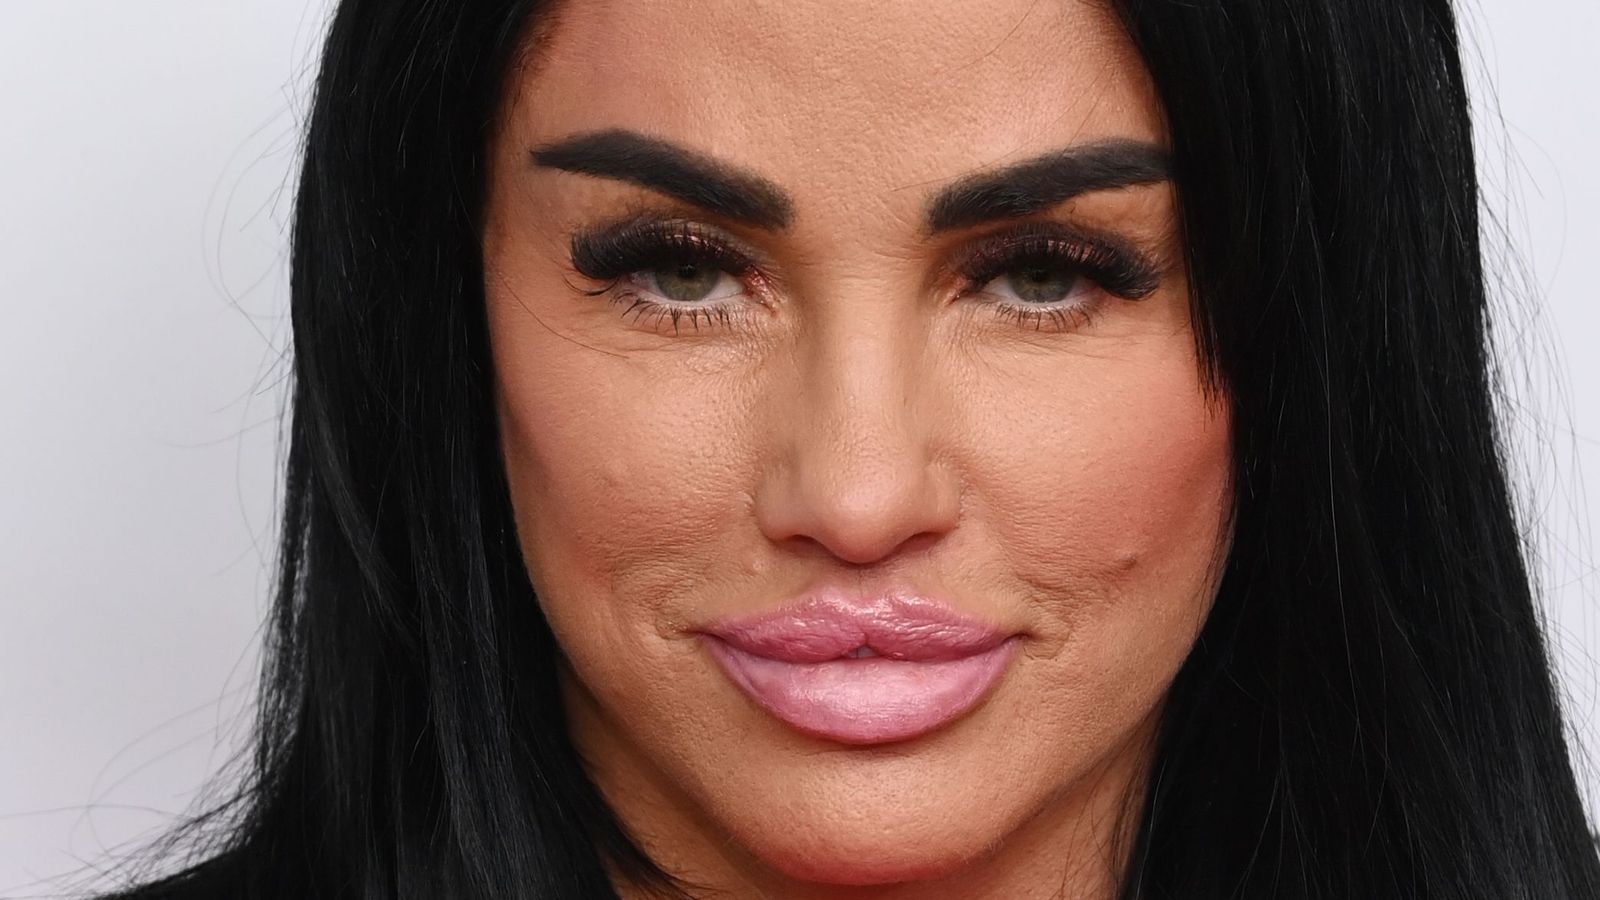 Katie Price missed court hearing where she was declared bankrupt because she was 'dealing with serious stuff'